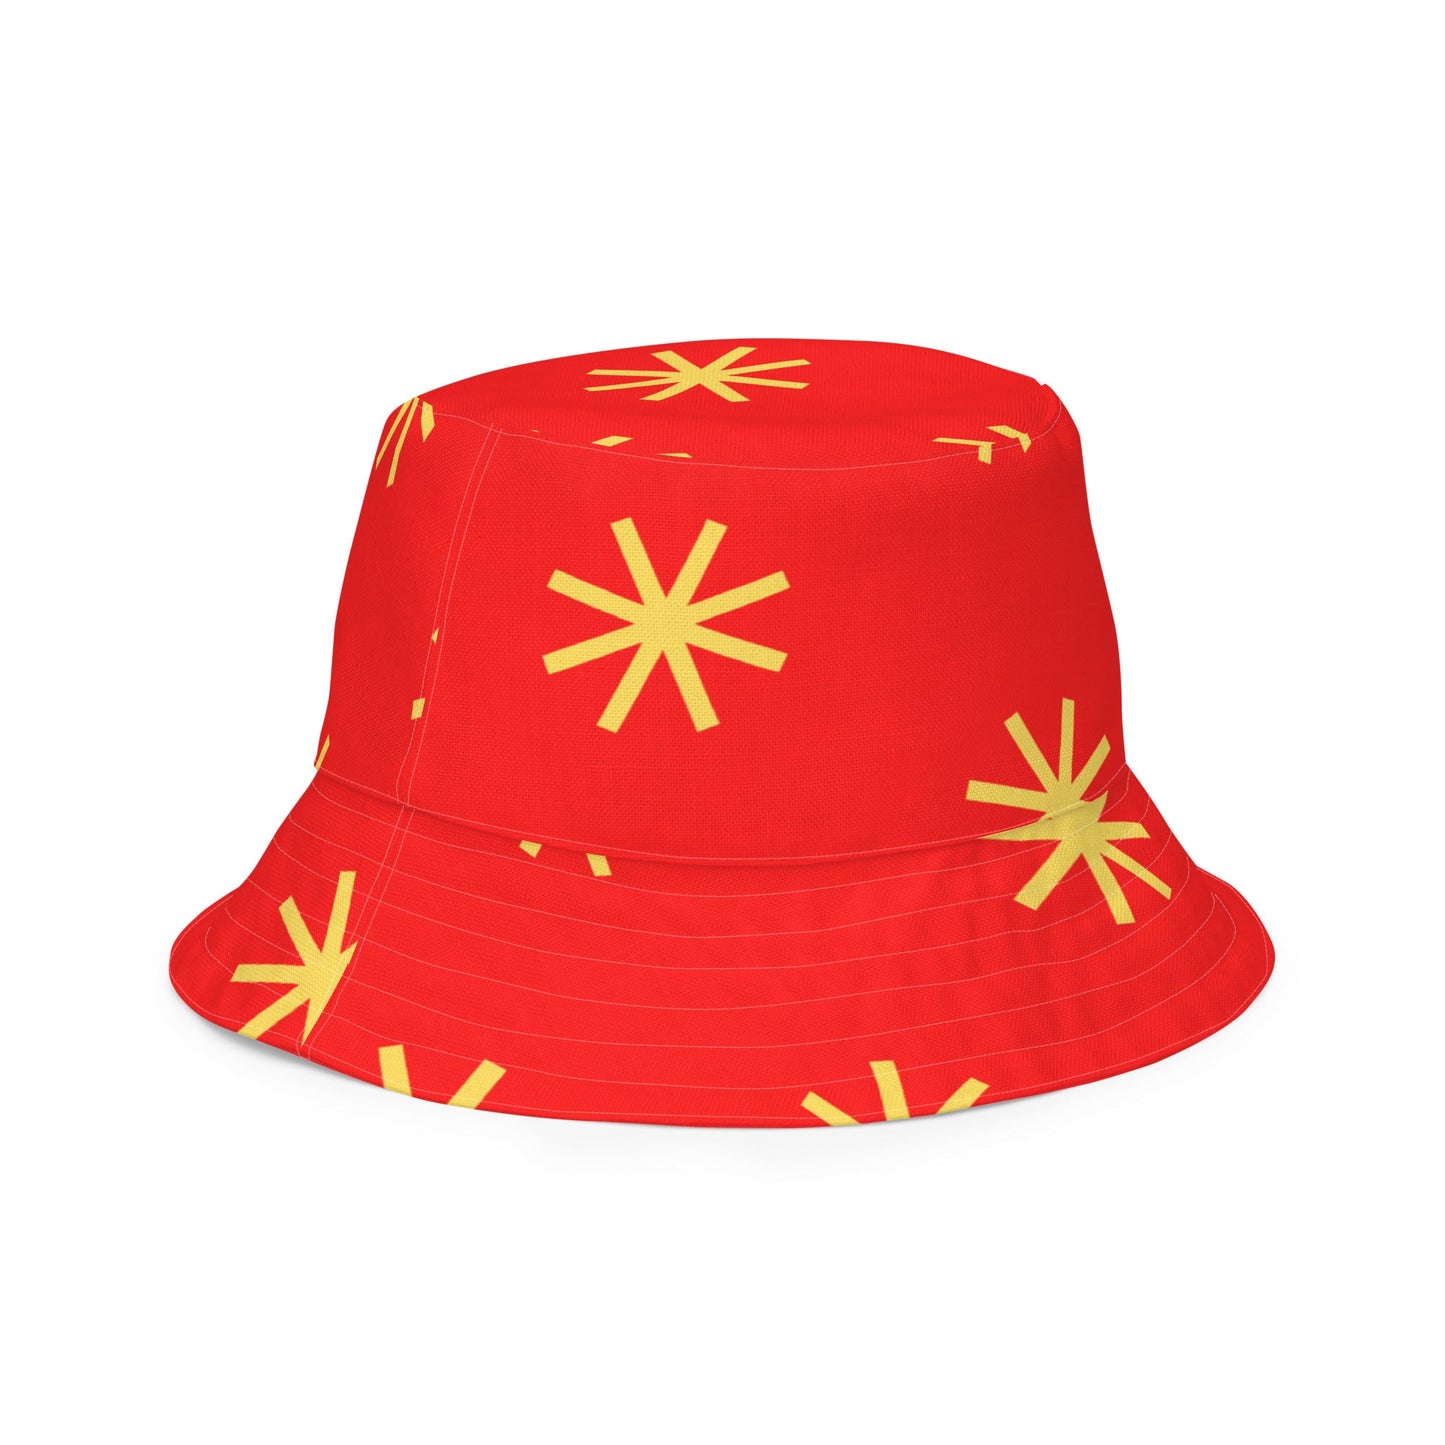 The Chip Reversible bucket hat castaway caychip and dalechip costume#tag4##tag5##tag6#